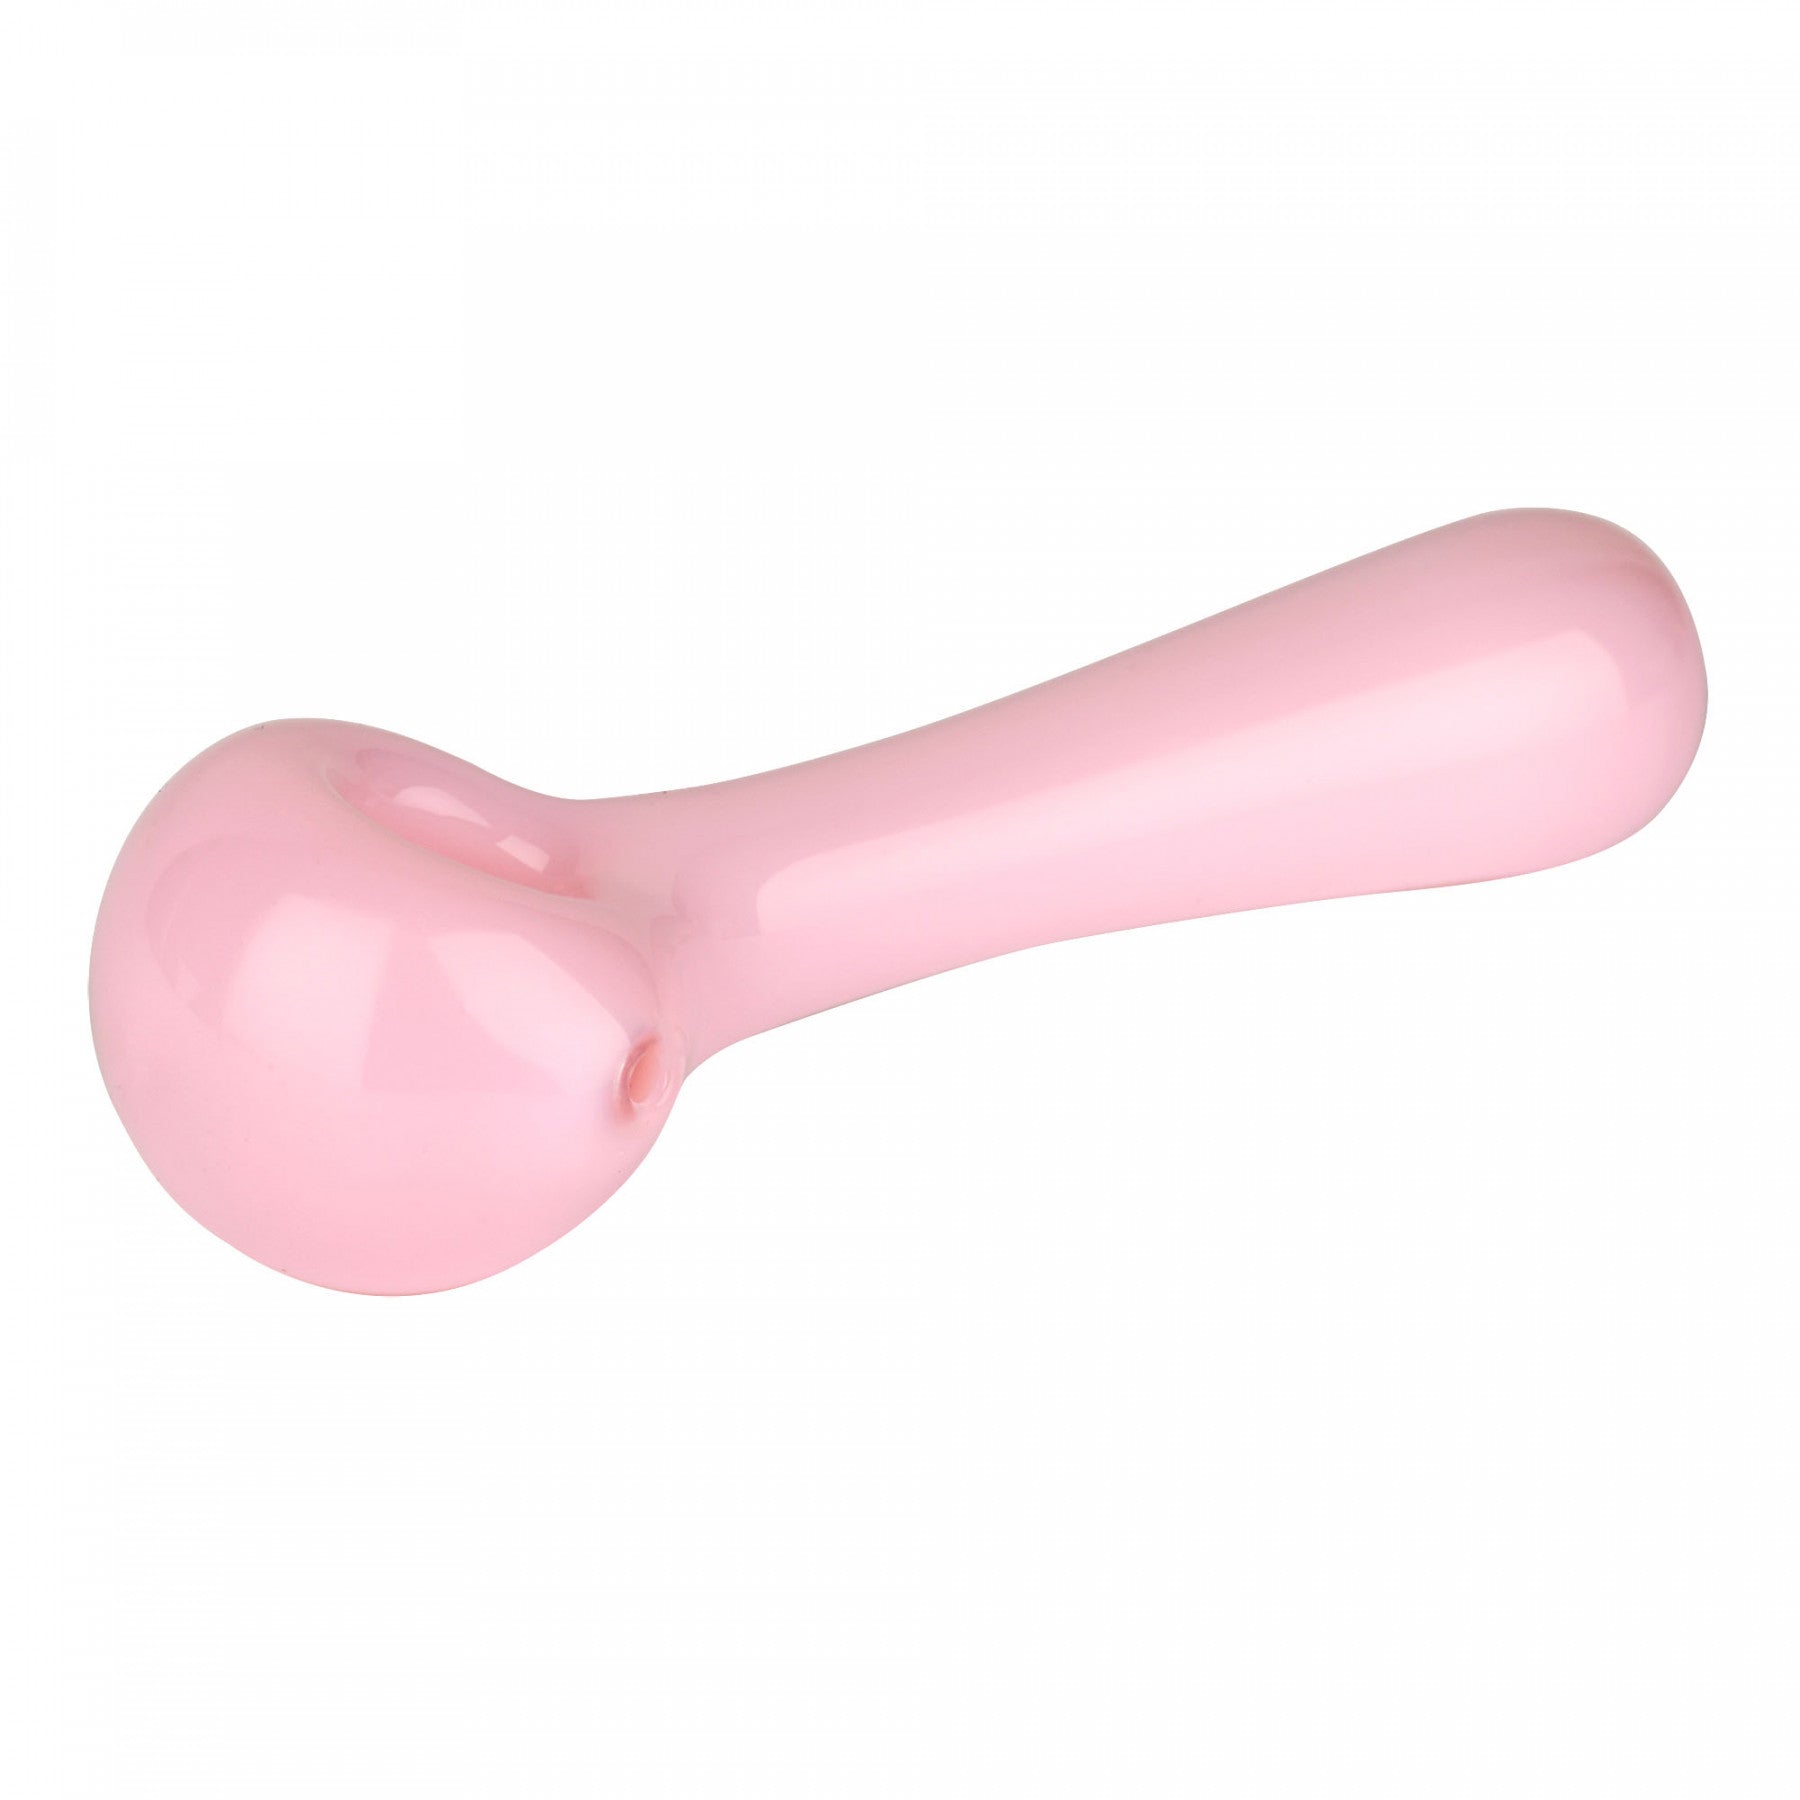 4.5" Solid Colour Spoon Hand Pipe